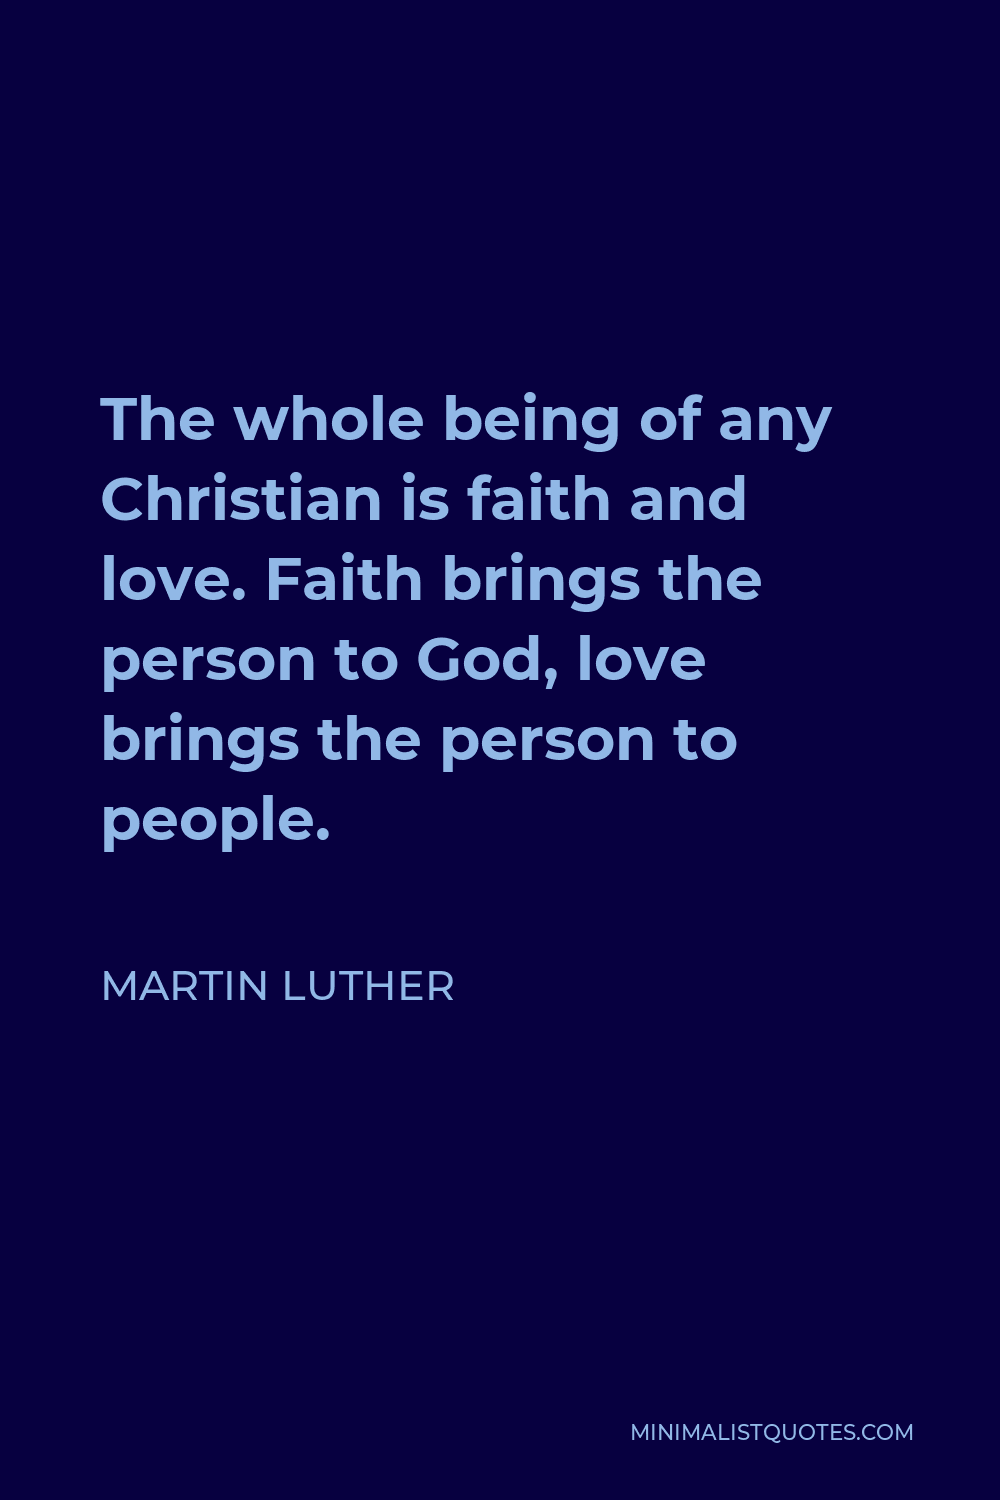 Martin Luther Quote - The whole being of any Christian is faith and love. Faith brings the person to God, love brings the person to people.